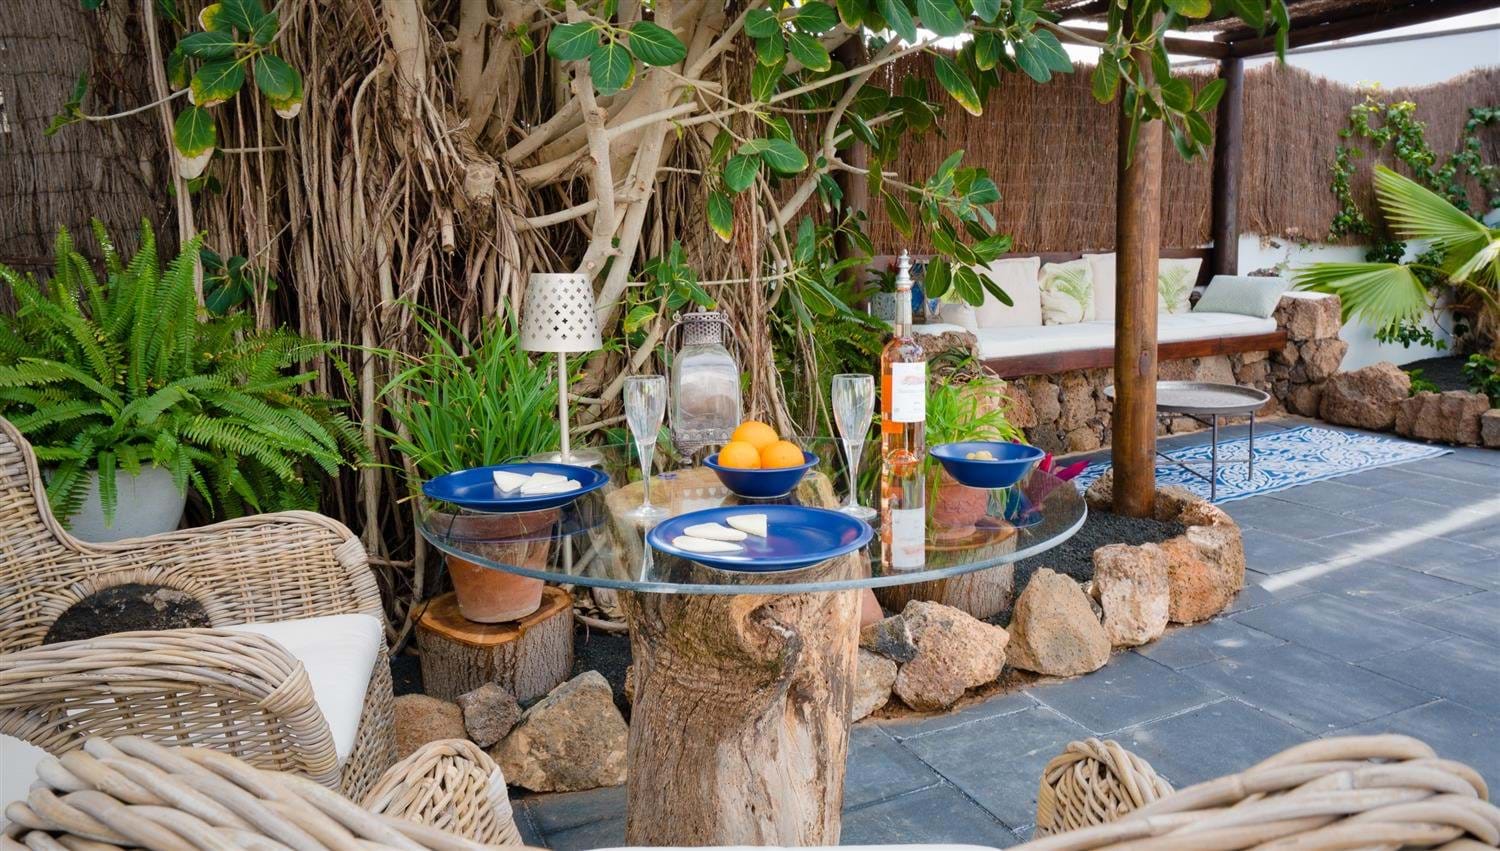 Outdoor dining on a tree stump table at Finca Botanico in Lanzarote